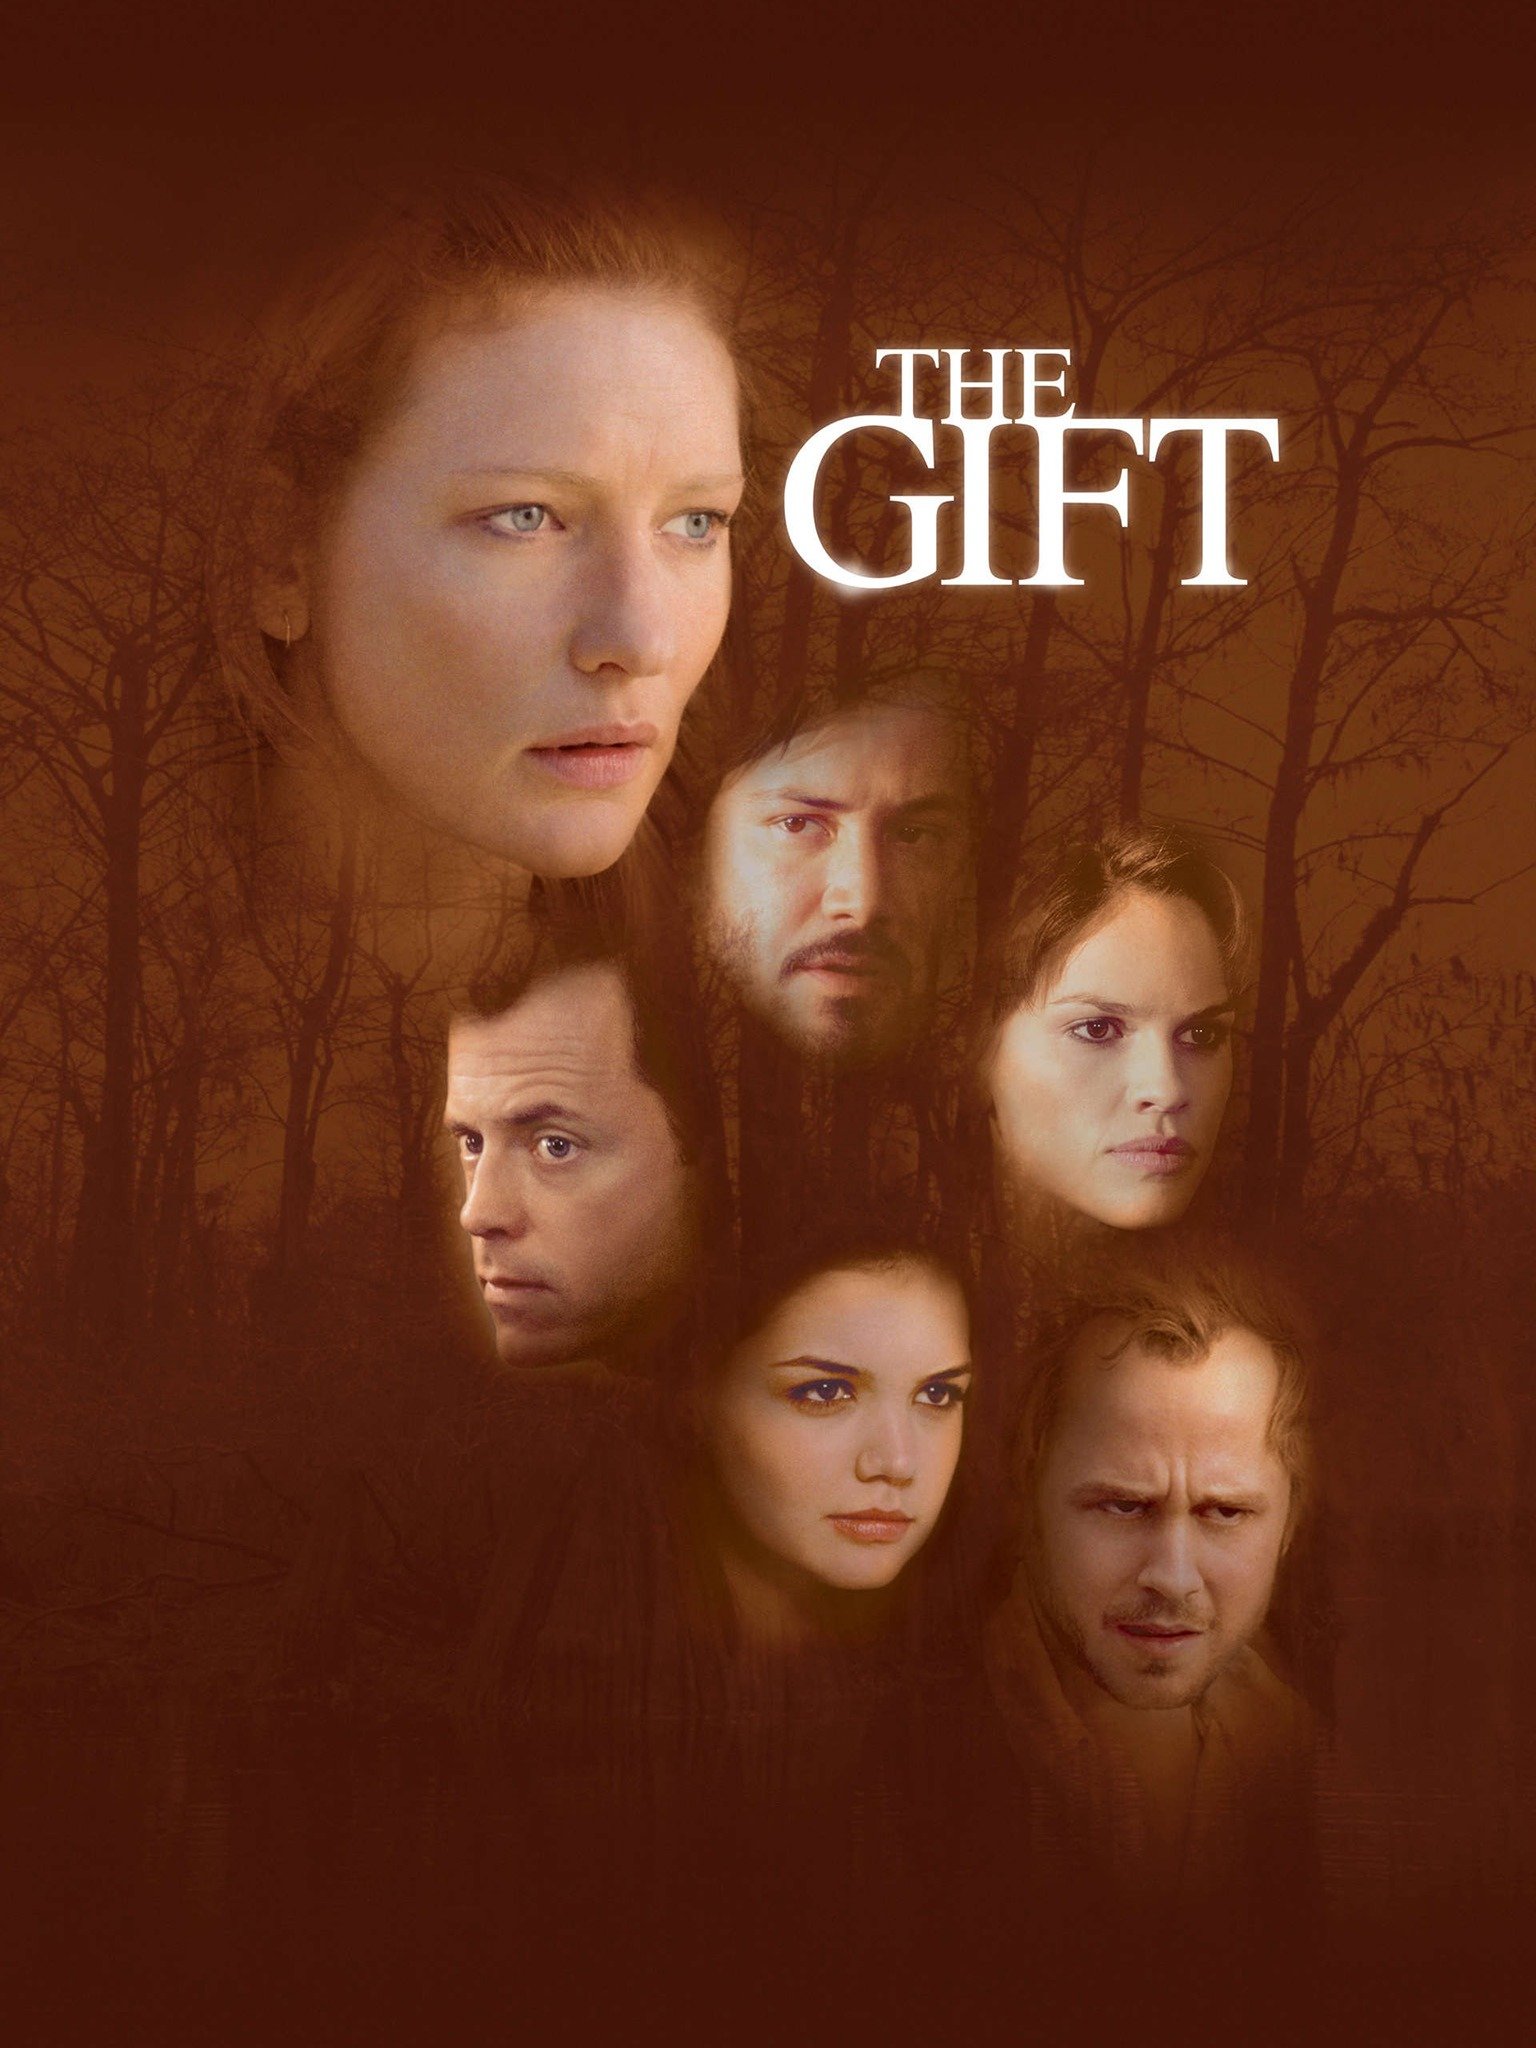 the gift movie review reddit